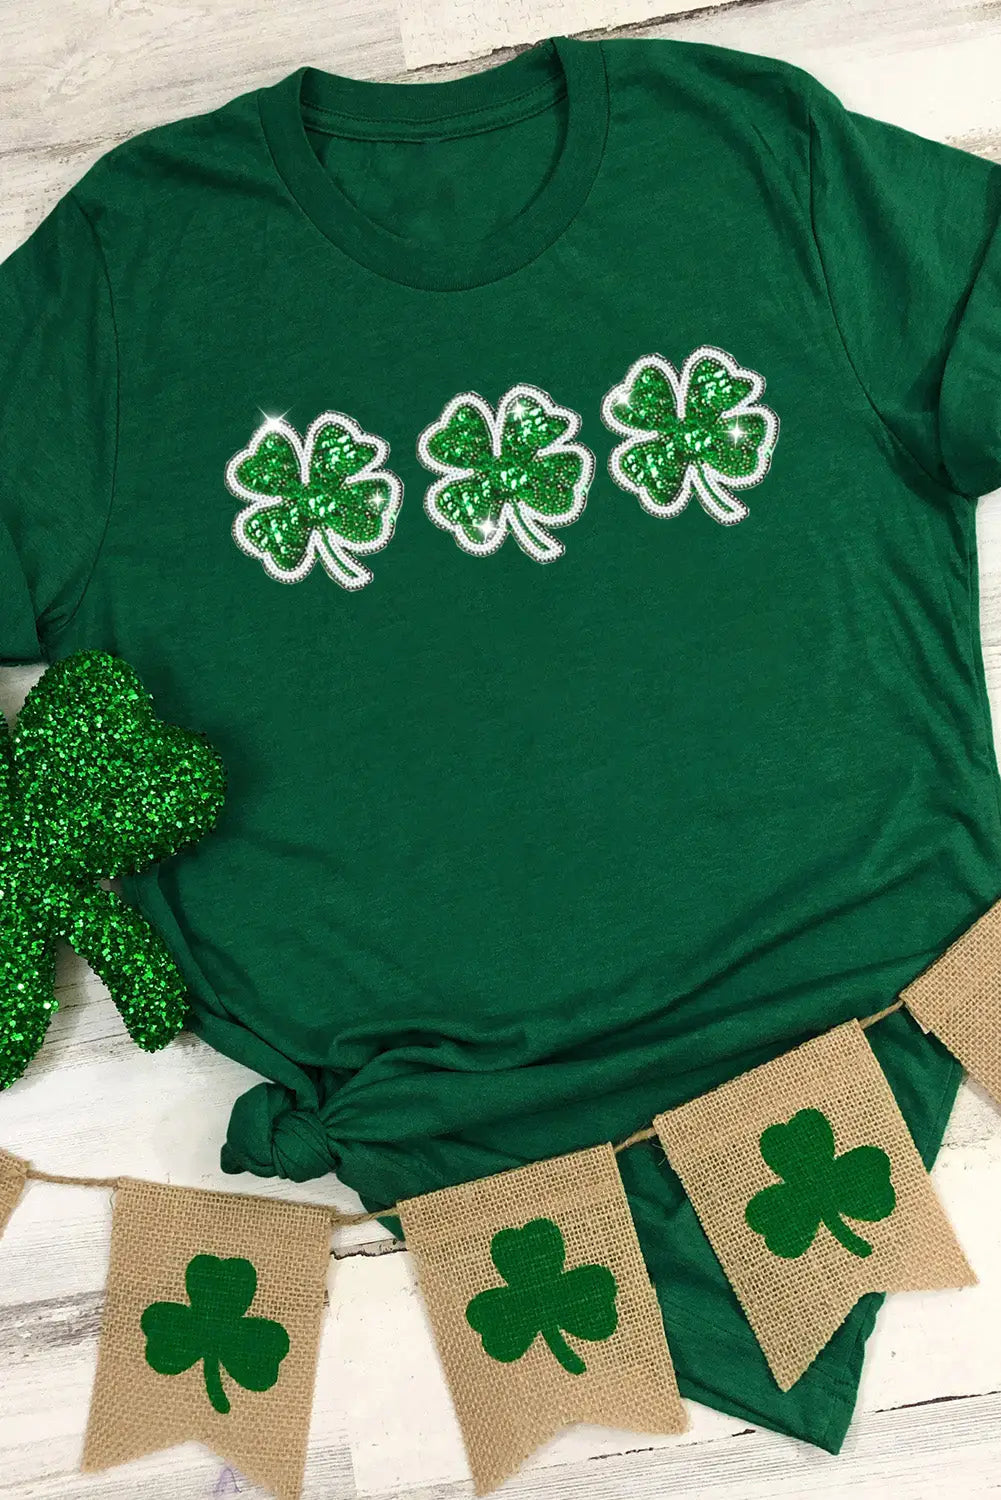 Green st patrick clover patch sequin graphic t-shirt - s / 62% polyester + 32% cotton + 6% elastane - t-shirts